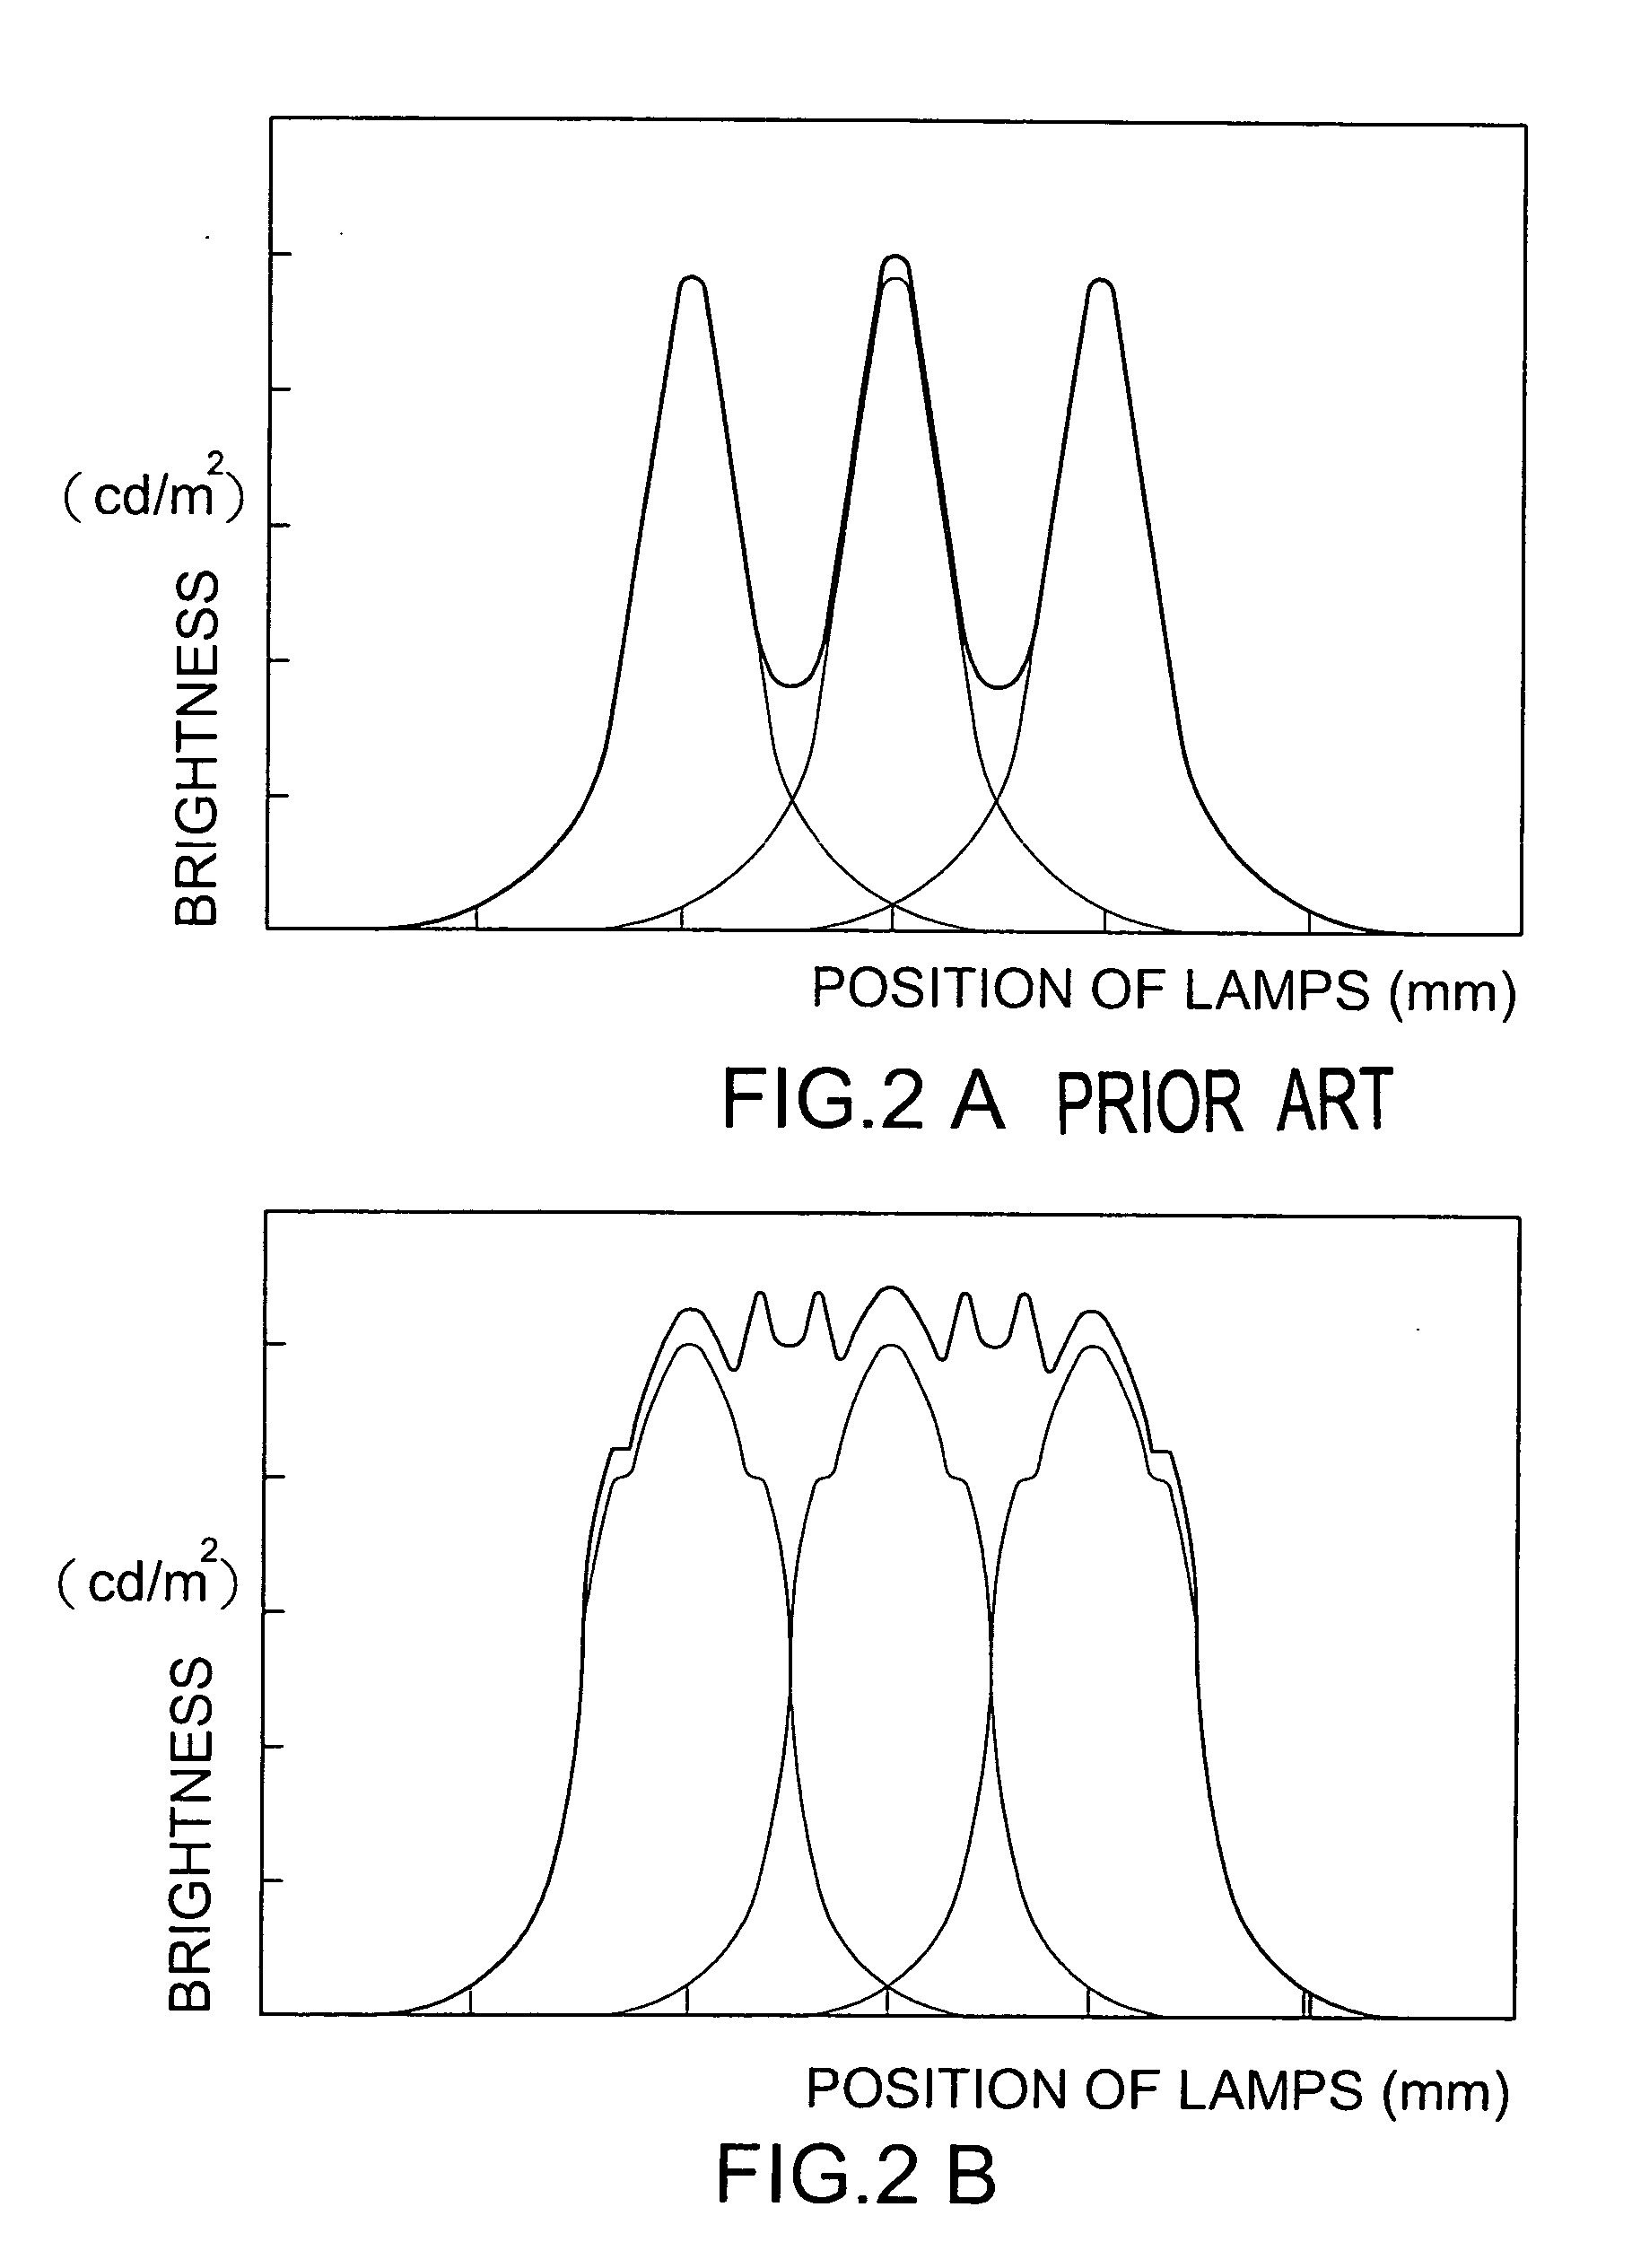 Direct-light illuminating backlight unit with a reflective structure for a liquid crystal display